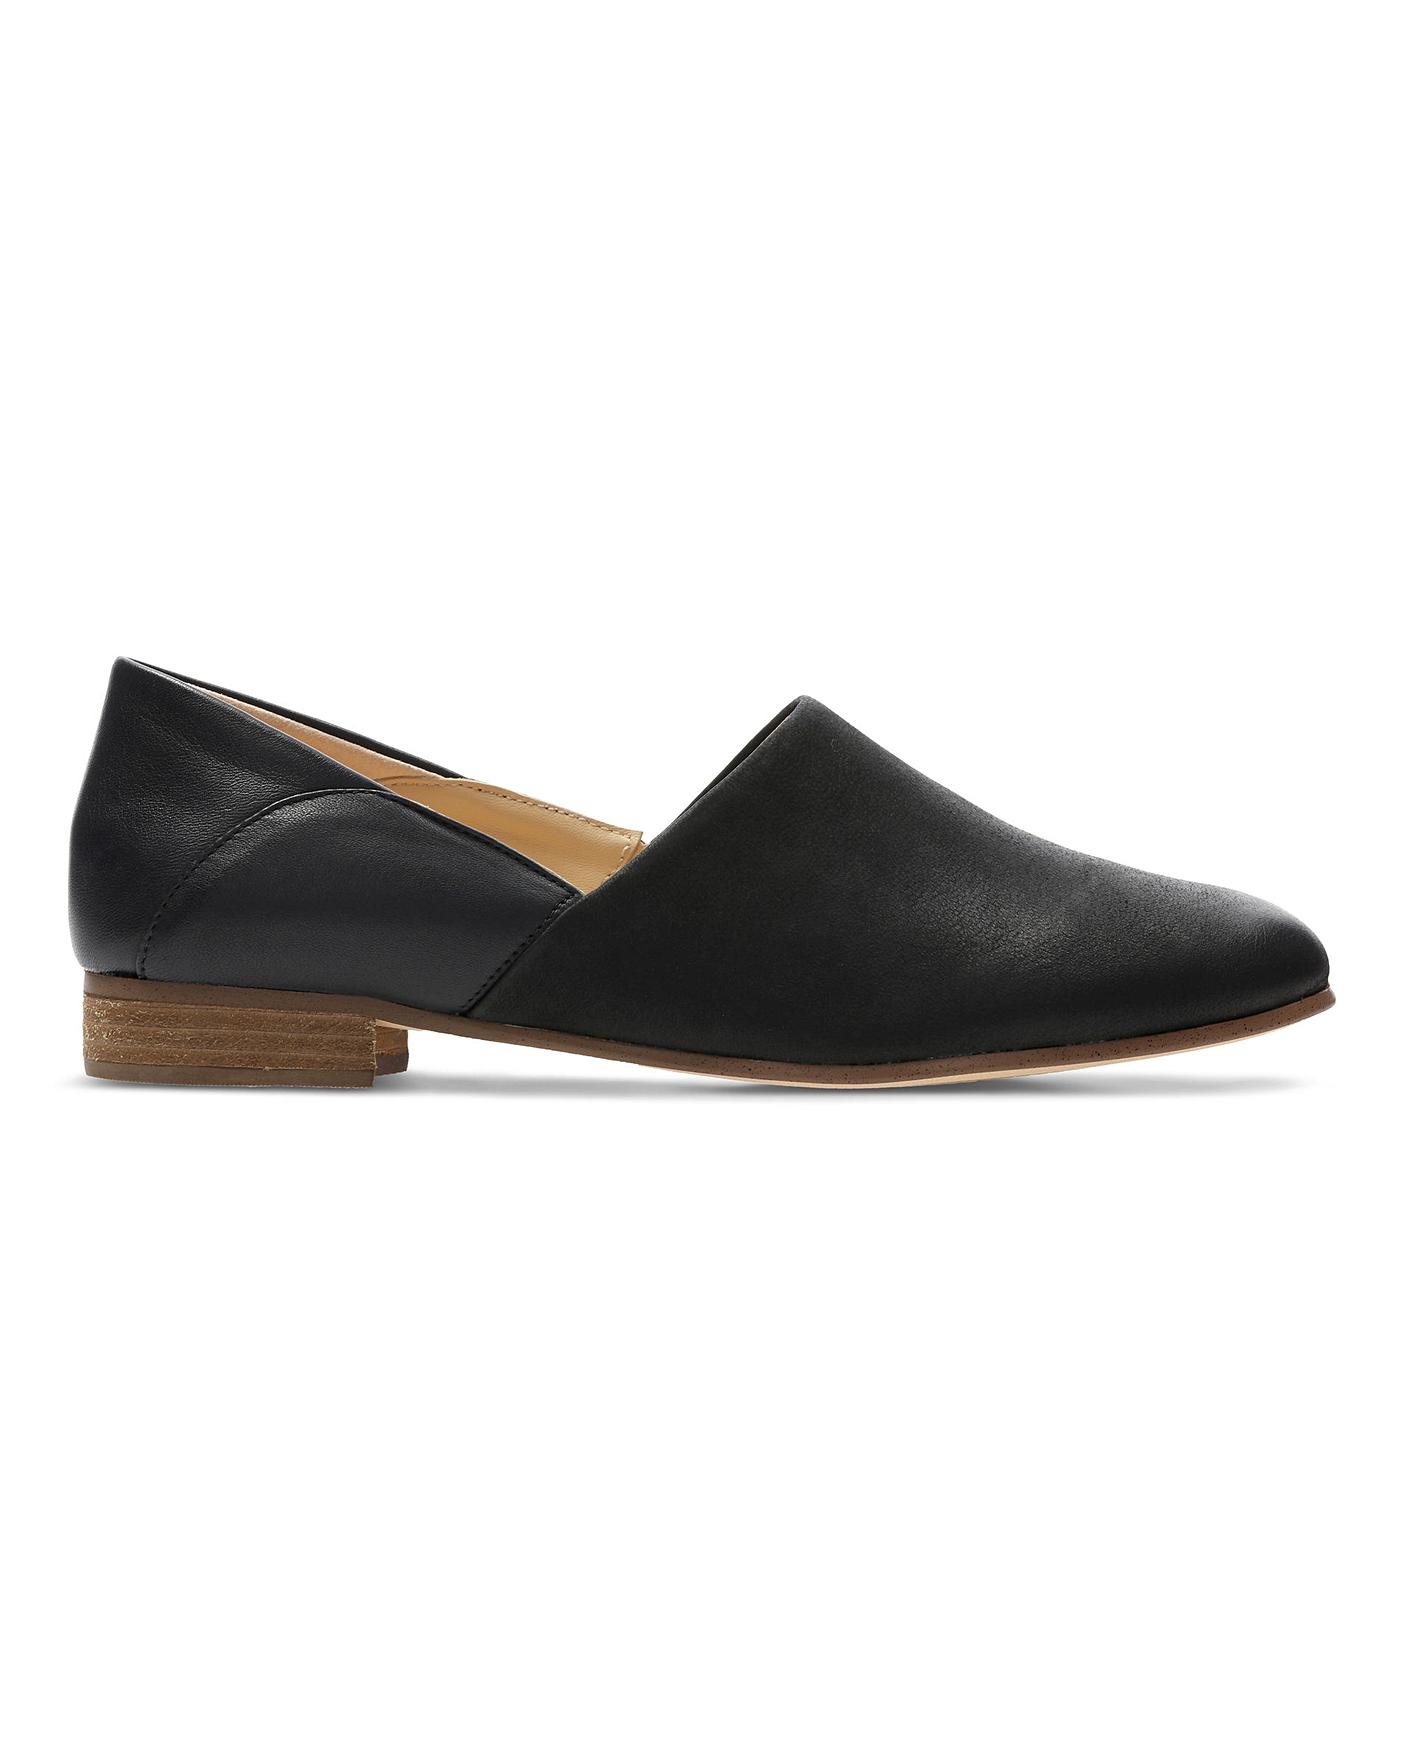 clarks shoes oxendales Cheaper Than 